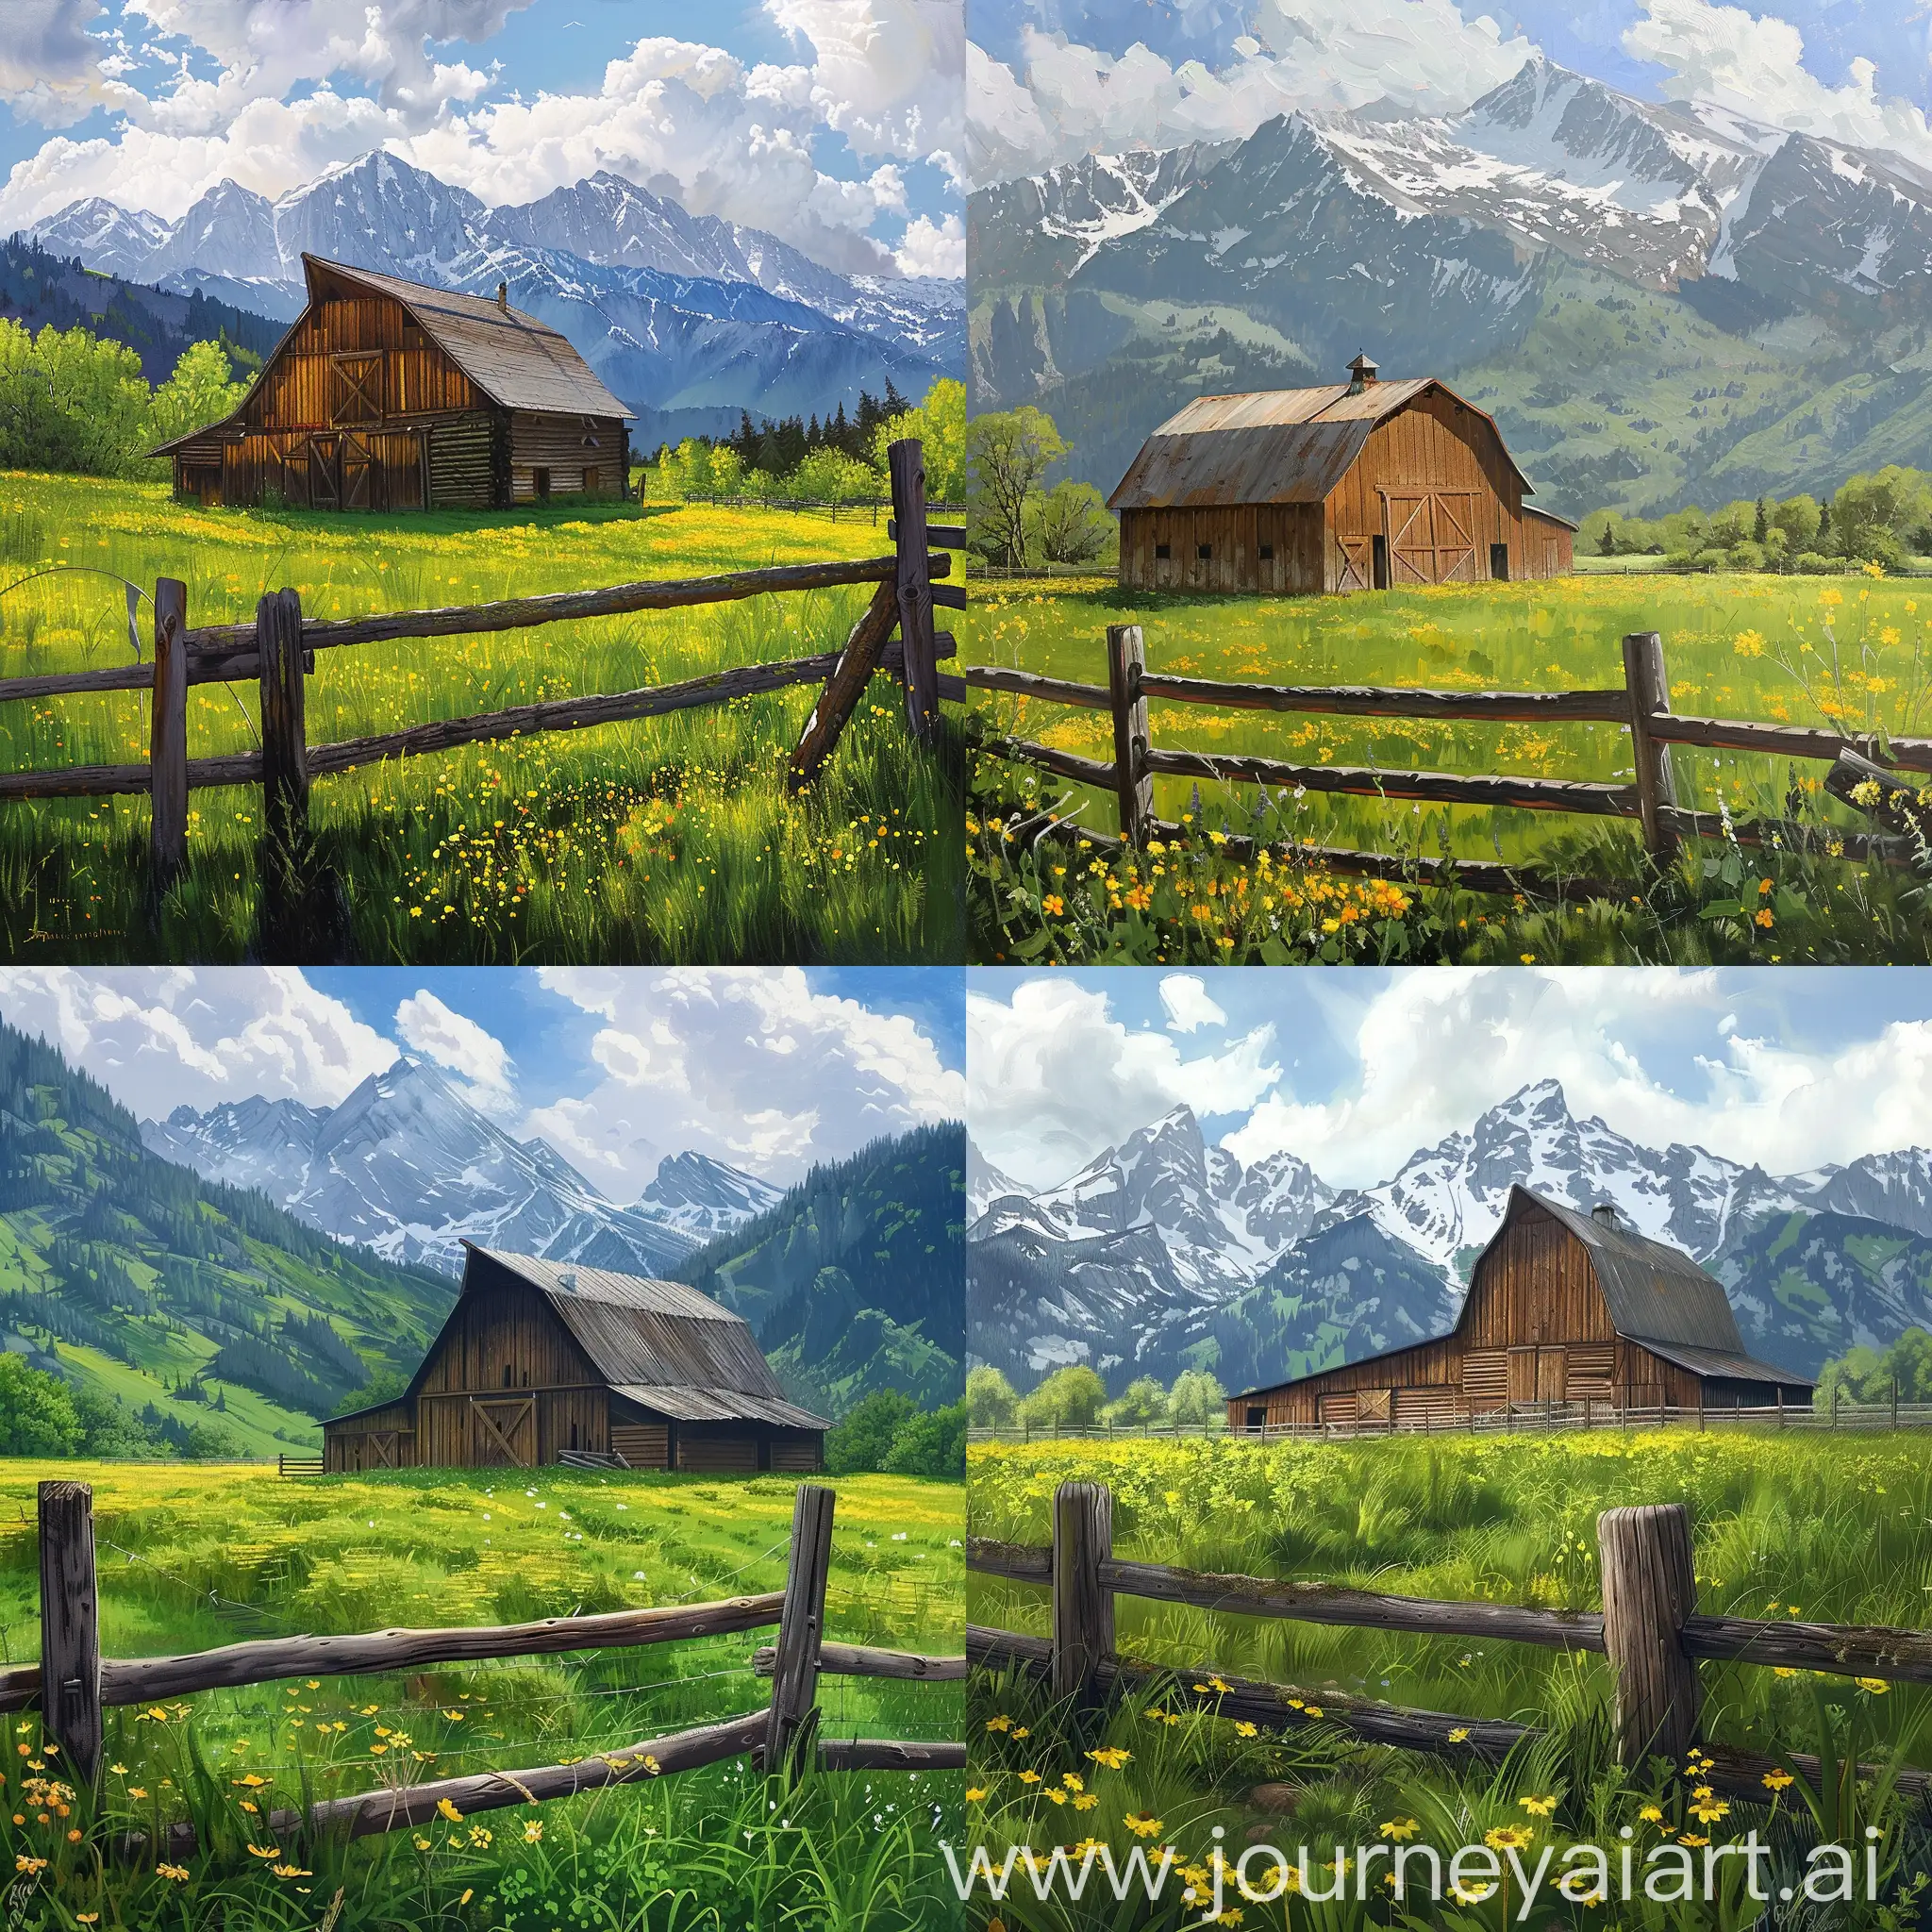 Tranquil-Rural-Scene-Wooden-Barn-in-Verdant-Field-with-Mountains-and-Wildflowers